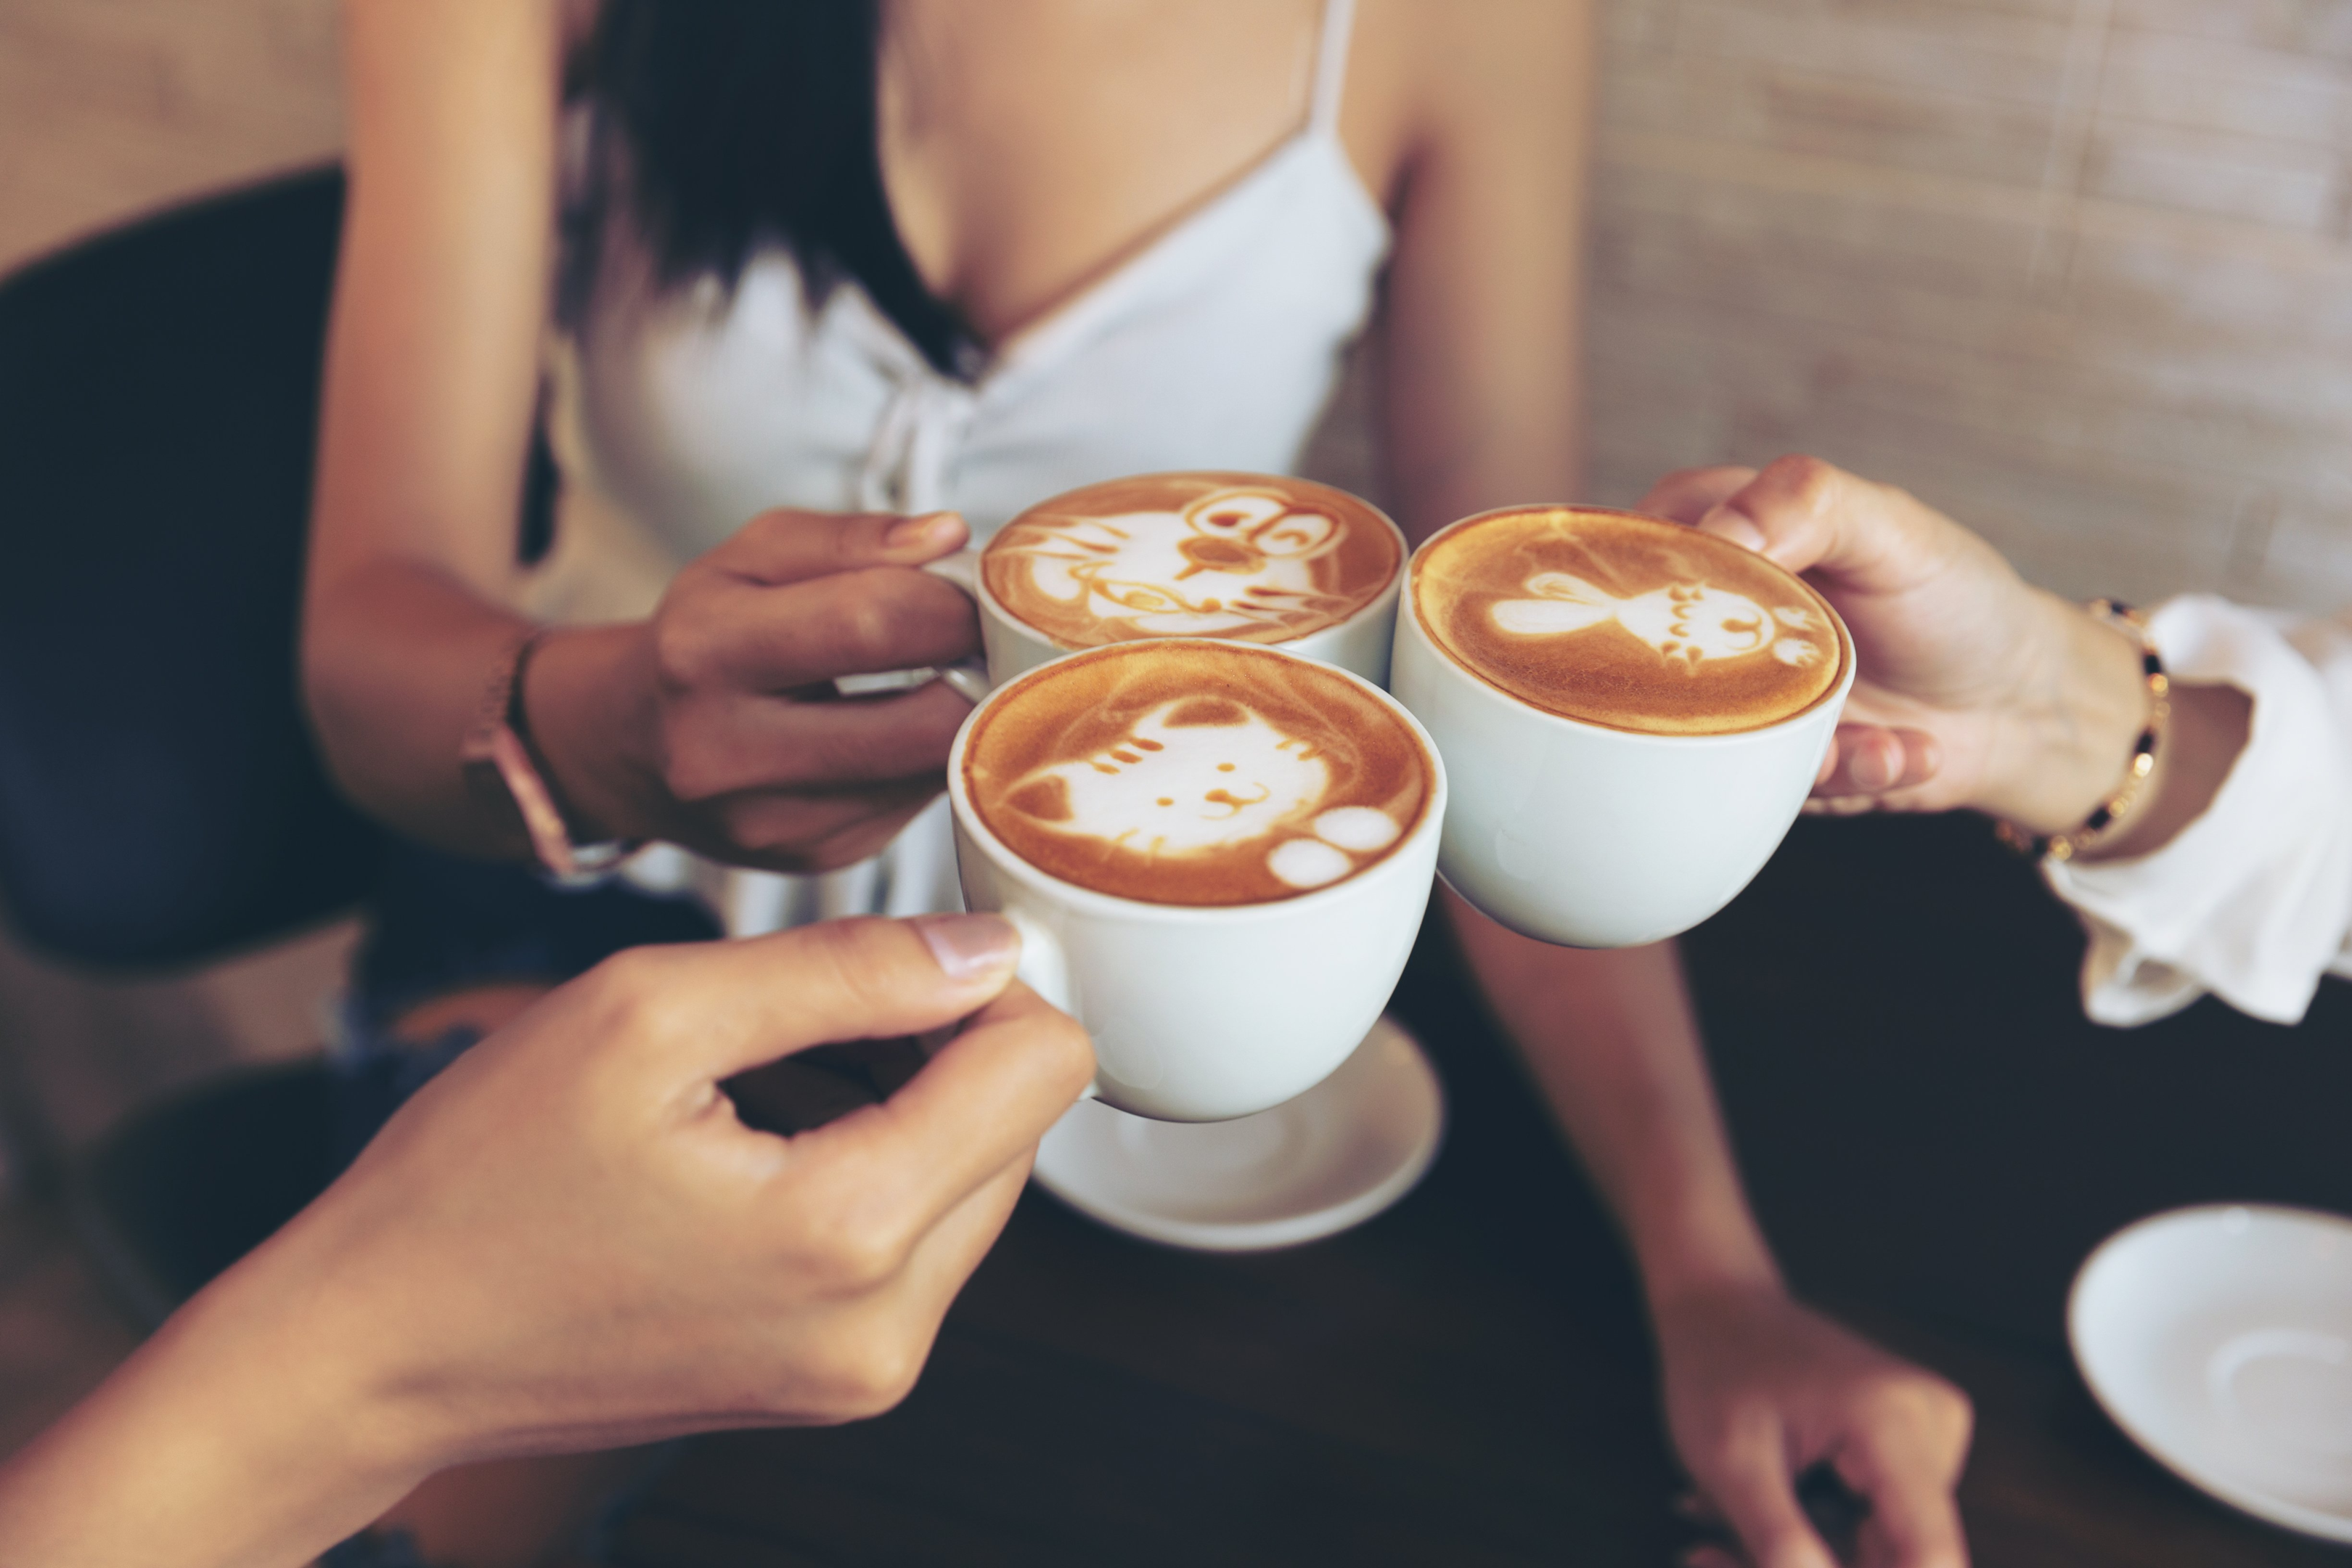 Group of 3 female friends drinking cappuccino's together.